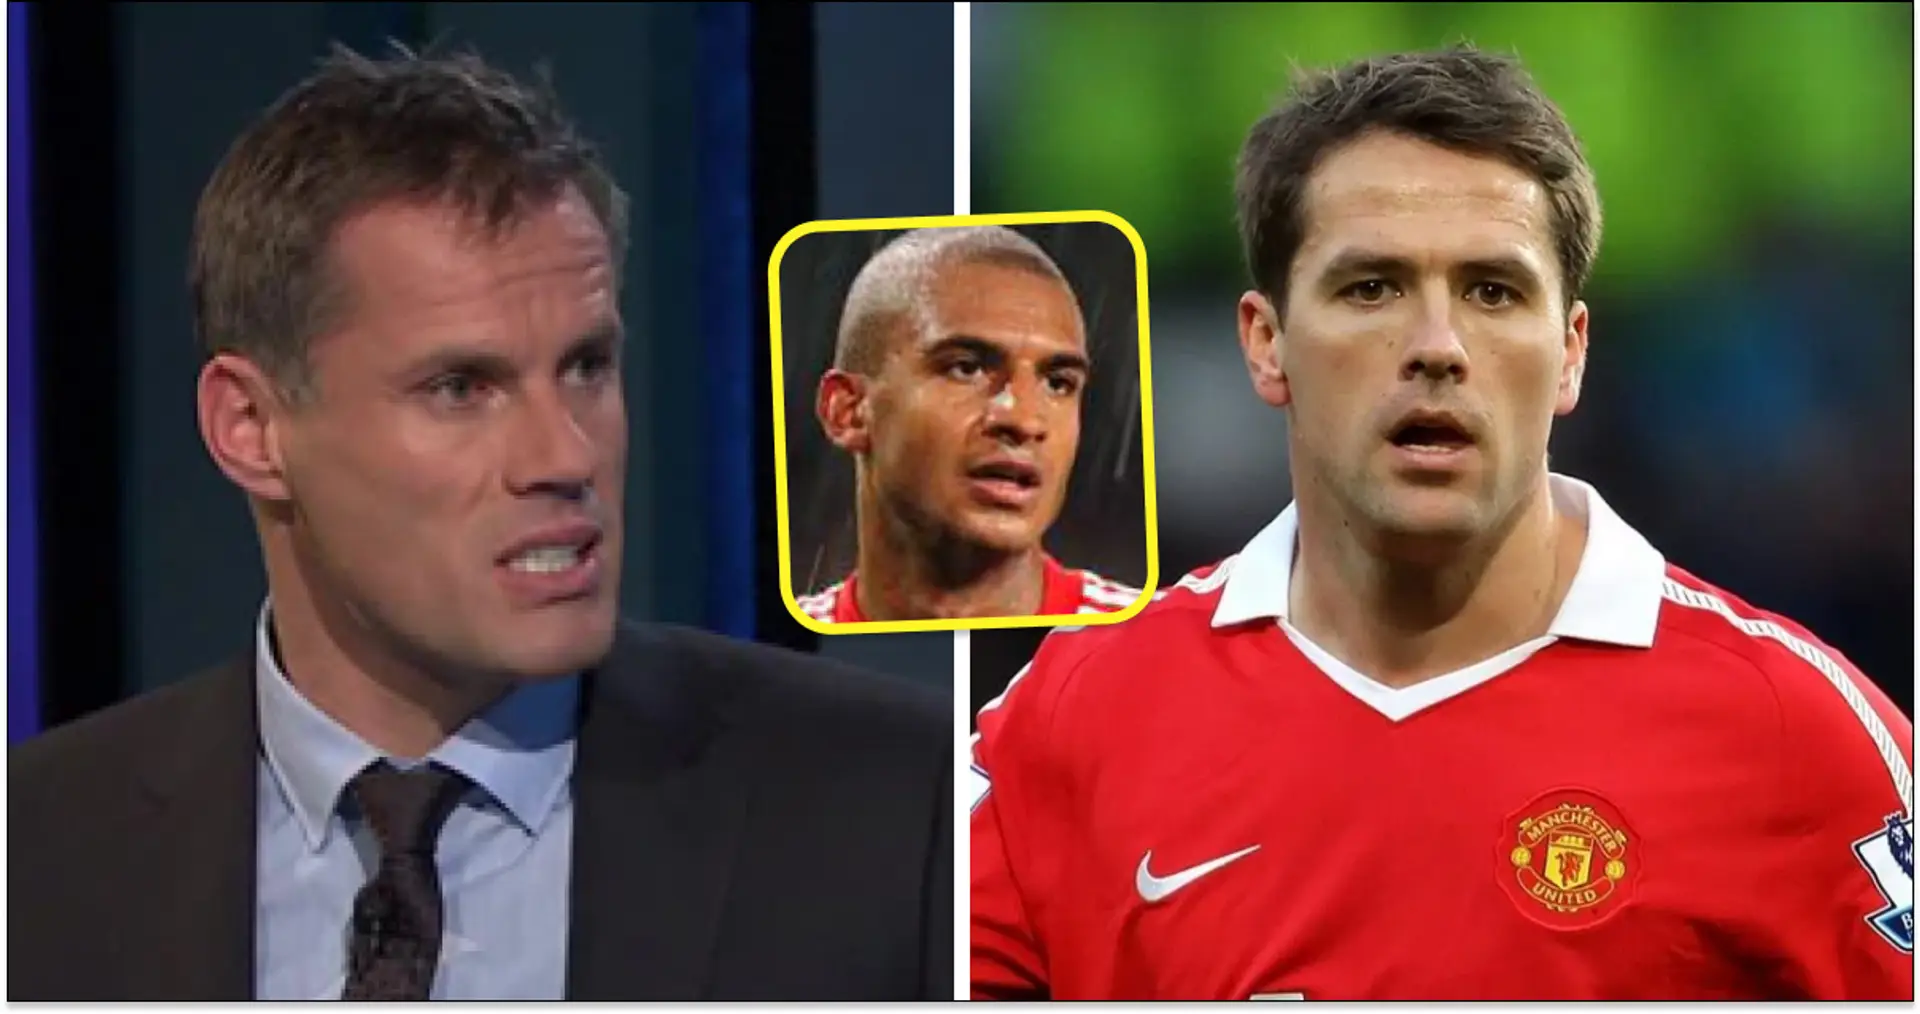 'We had just signed David Ngog': Carragher recalls how he tried to convince Liverpool to stop Owen from going to Man United